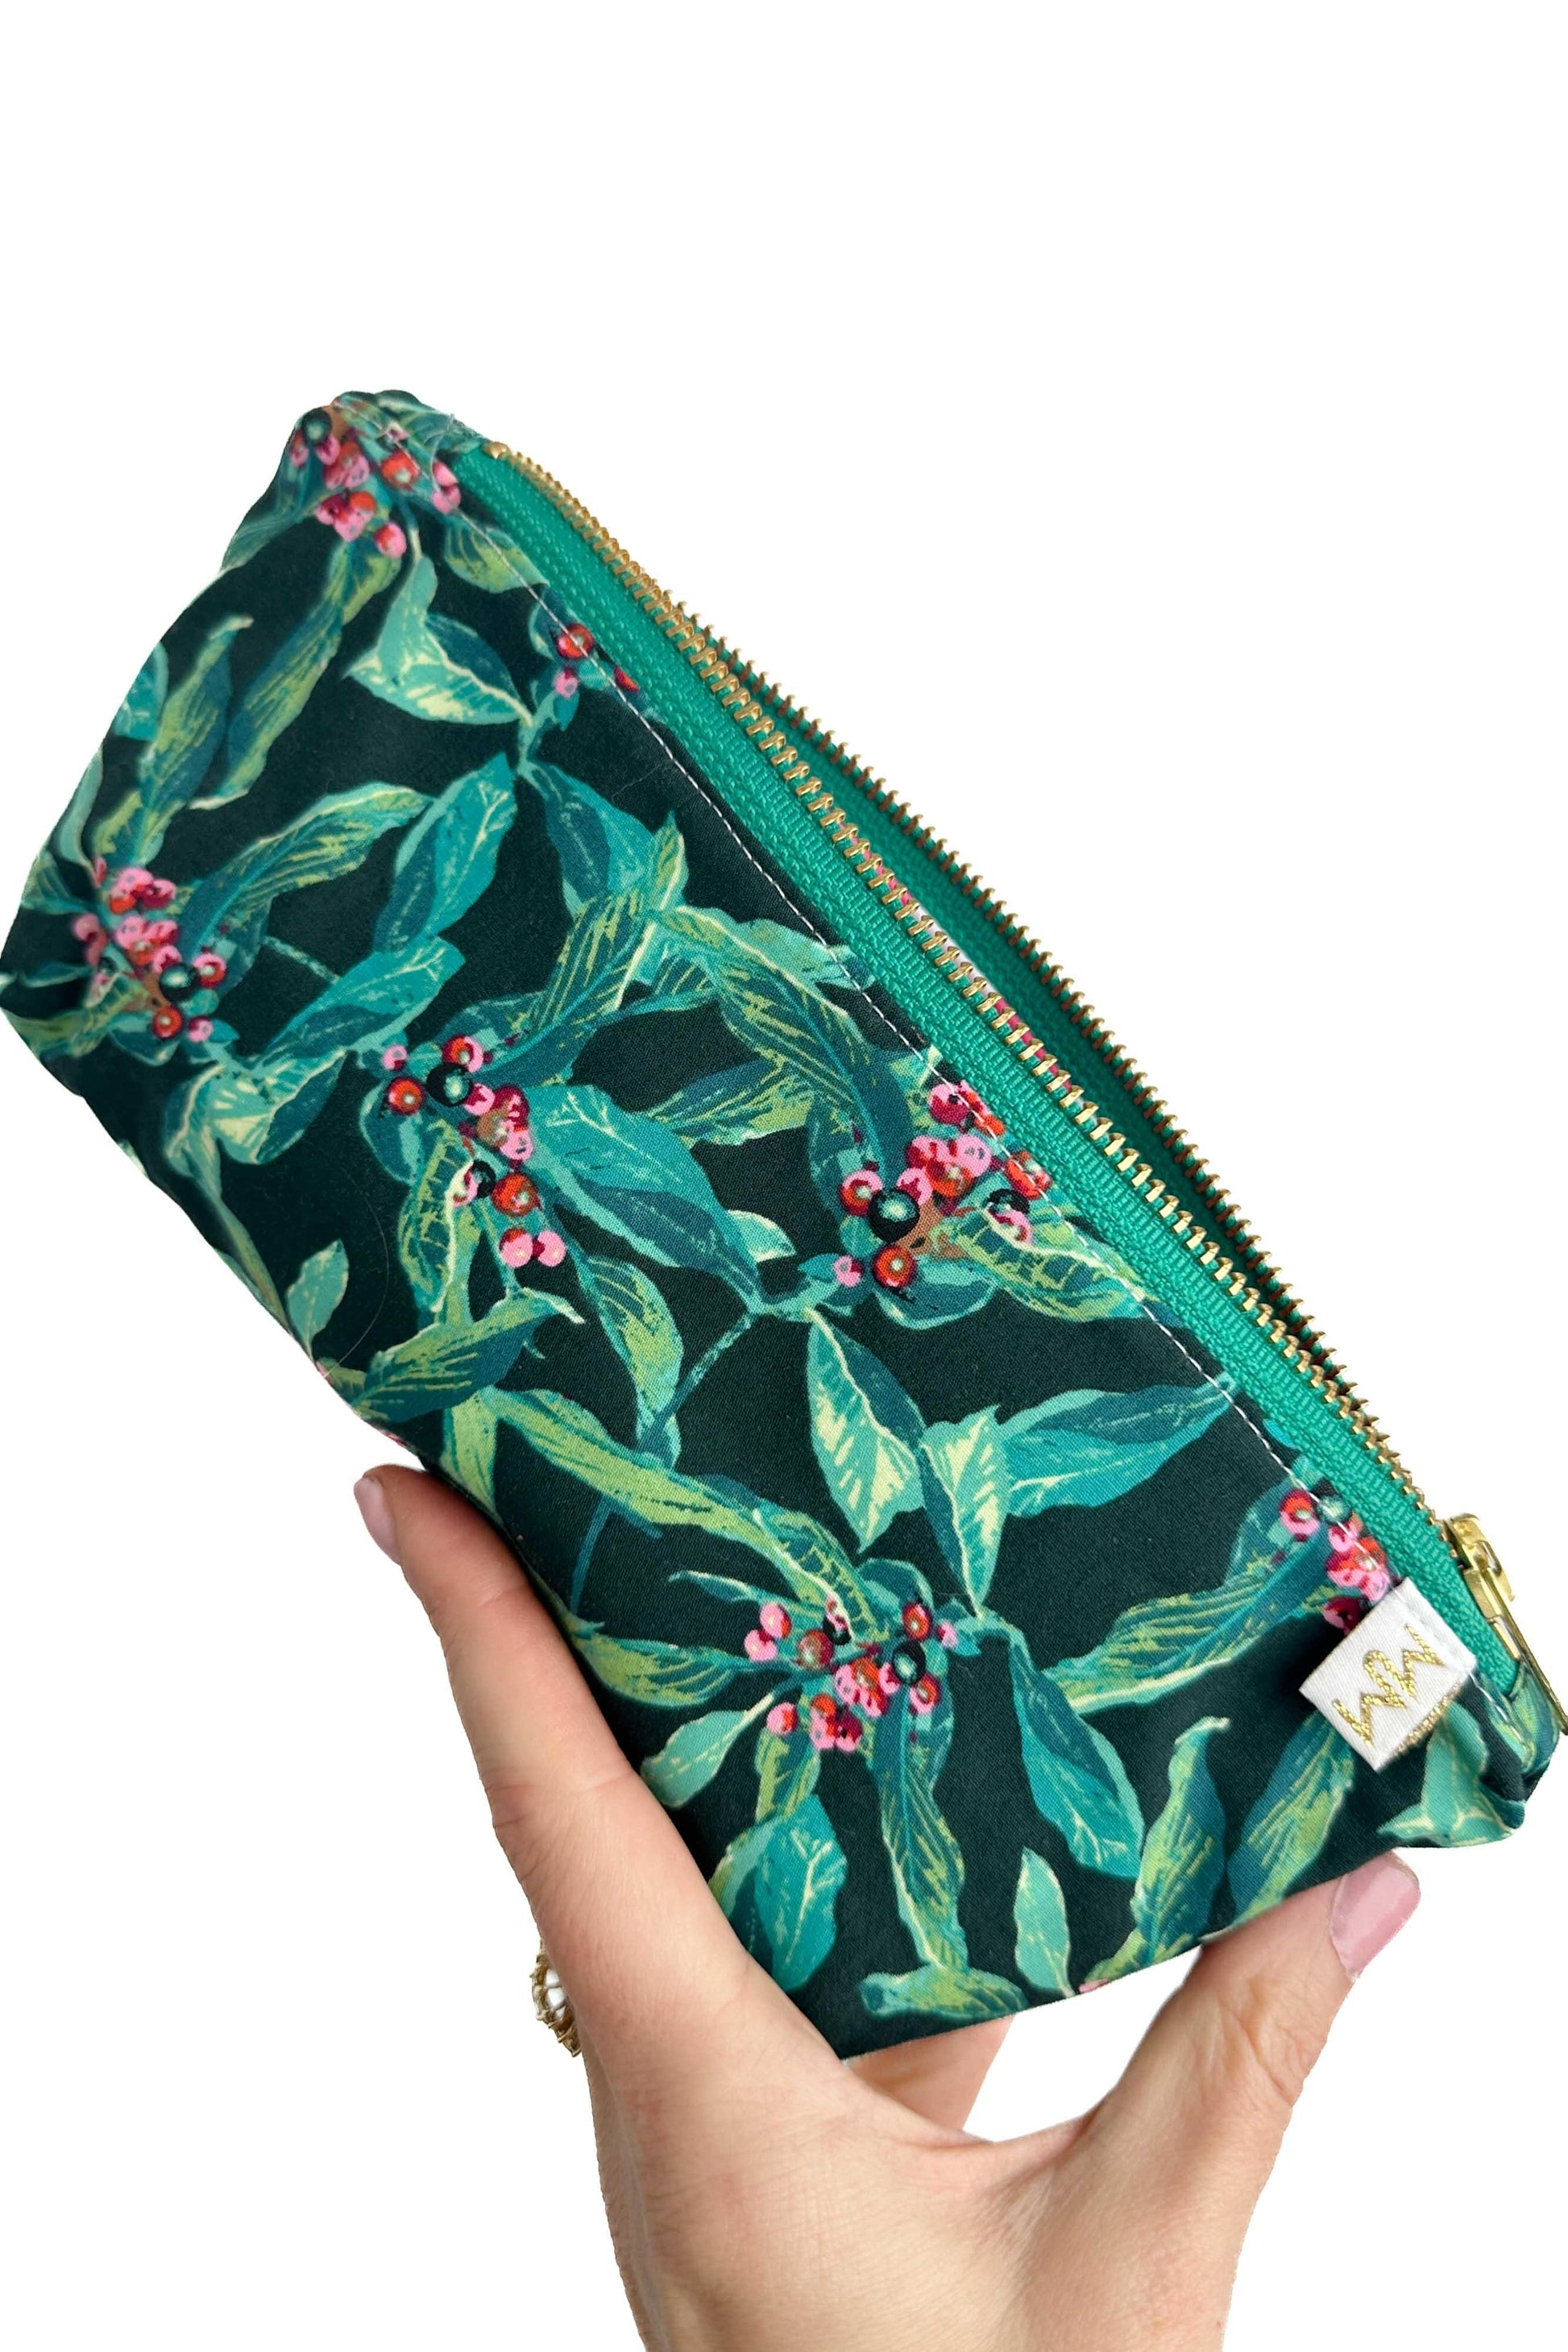 Rainforest Stash Travel Bag with Compartments READY TO SHIP - Modern Makerie